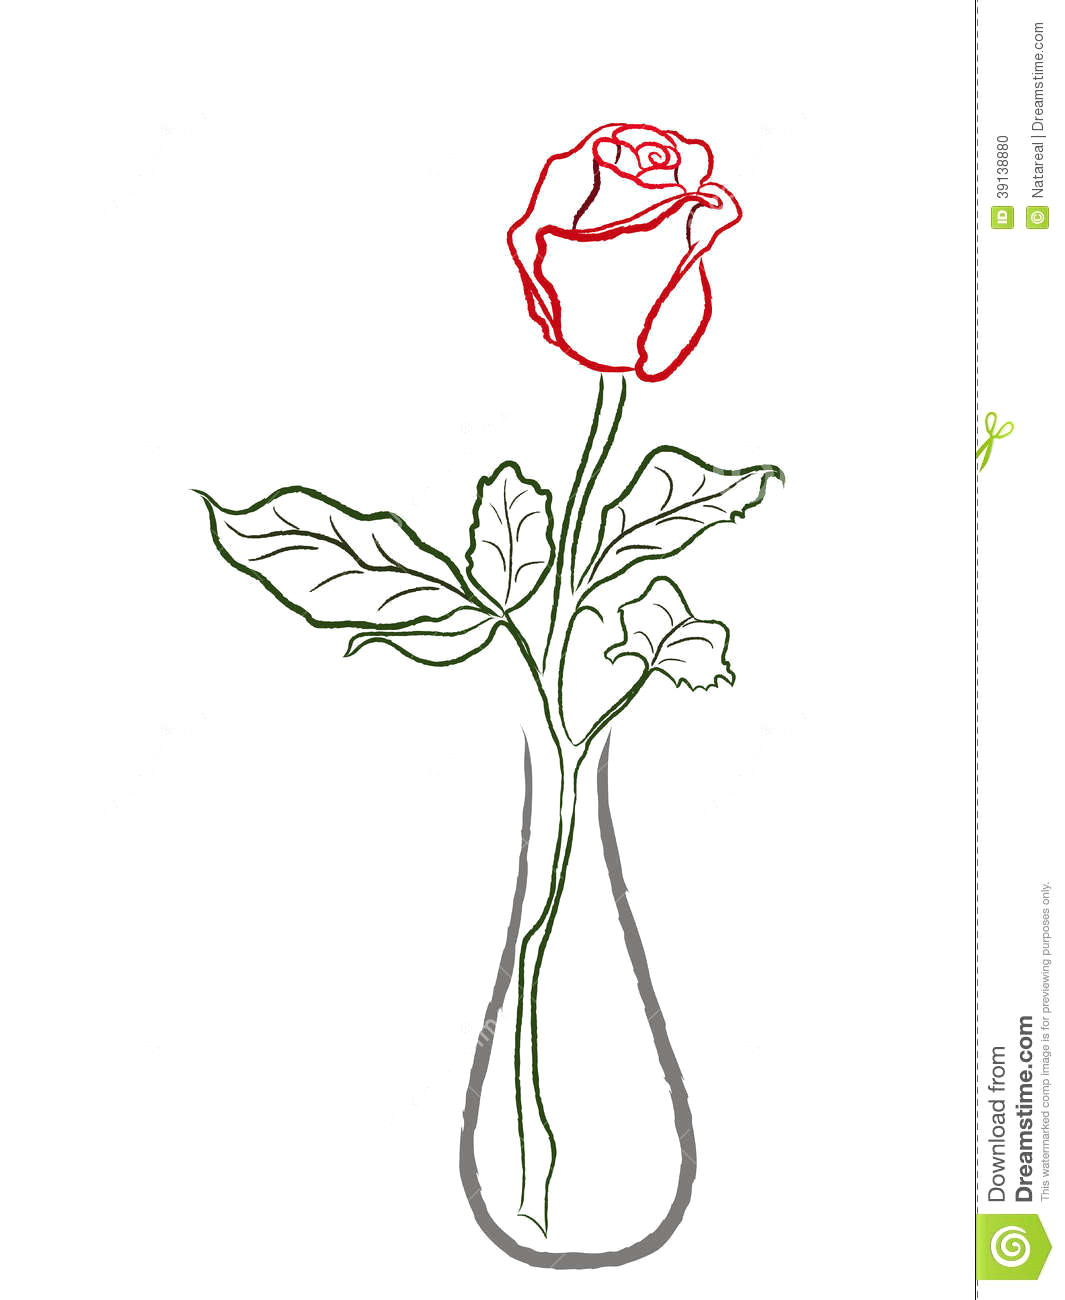 roses pictures to draw new drawn vase red rose 3h vases how to draw roses in